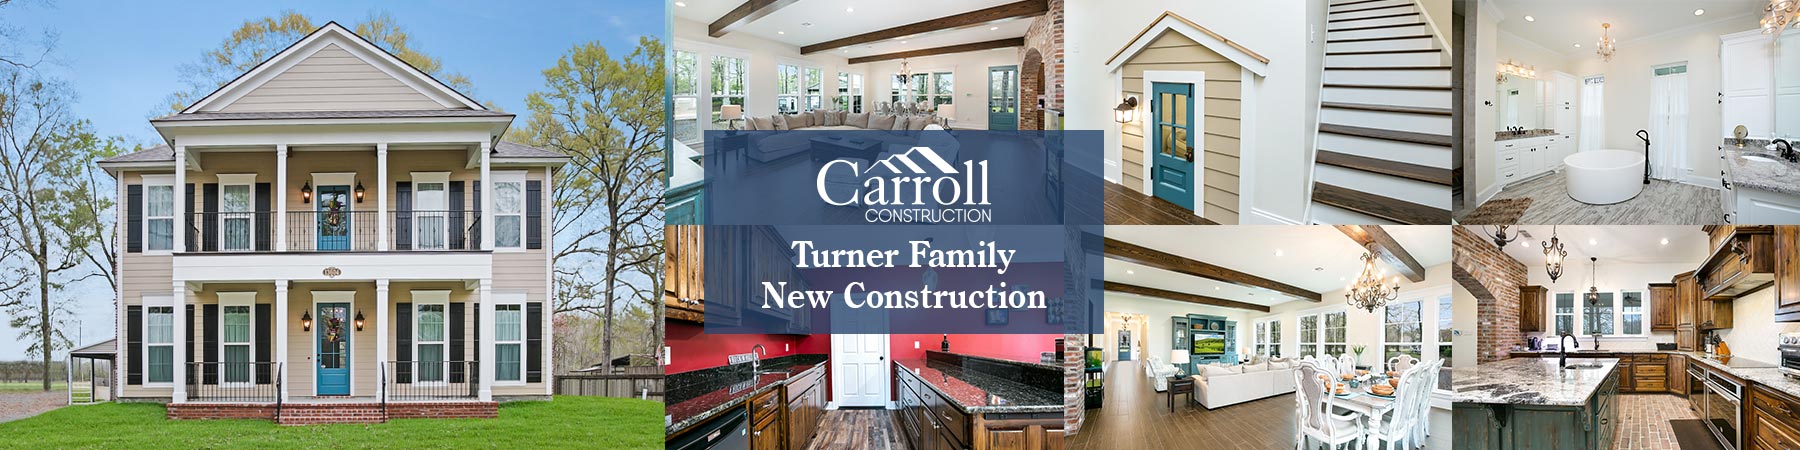 Turner Family New Construction Project